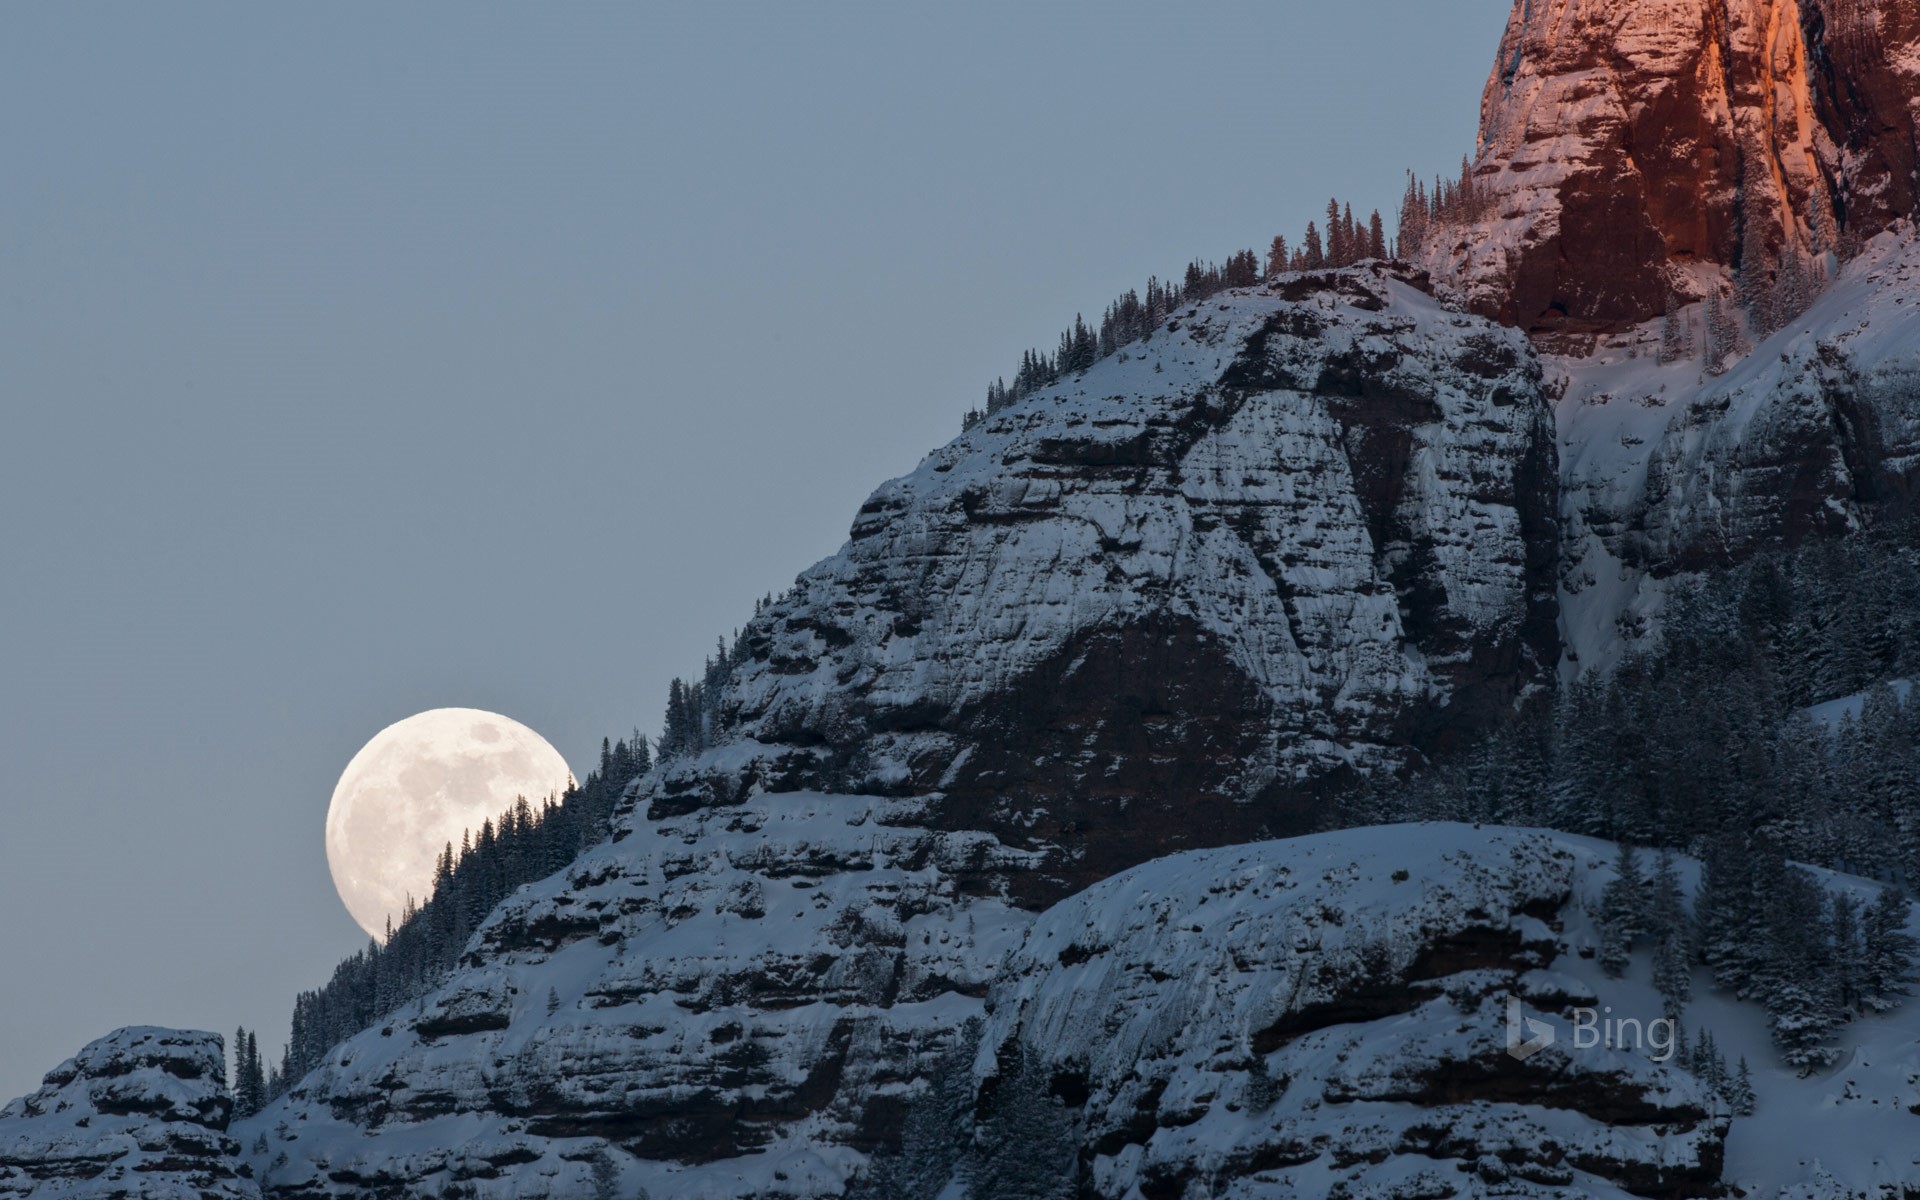 Moonrise over Yellowstone National Park